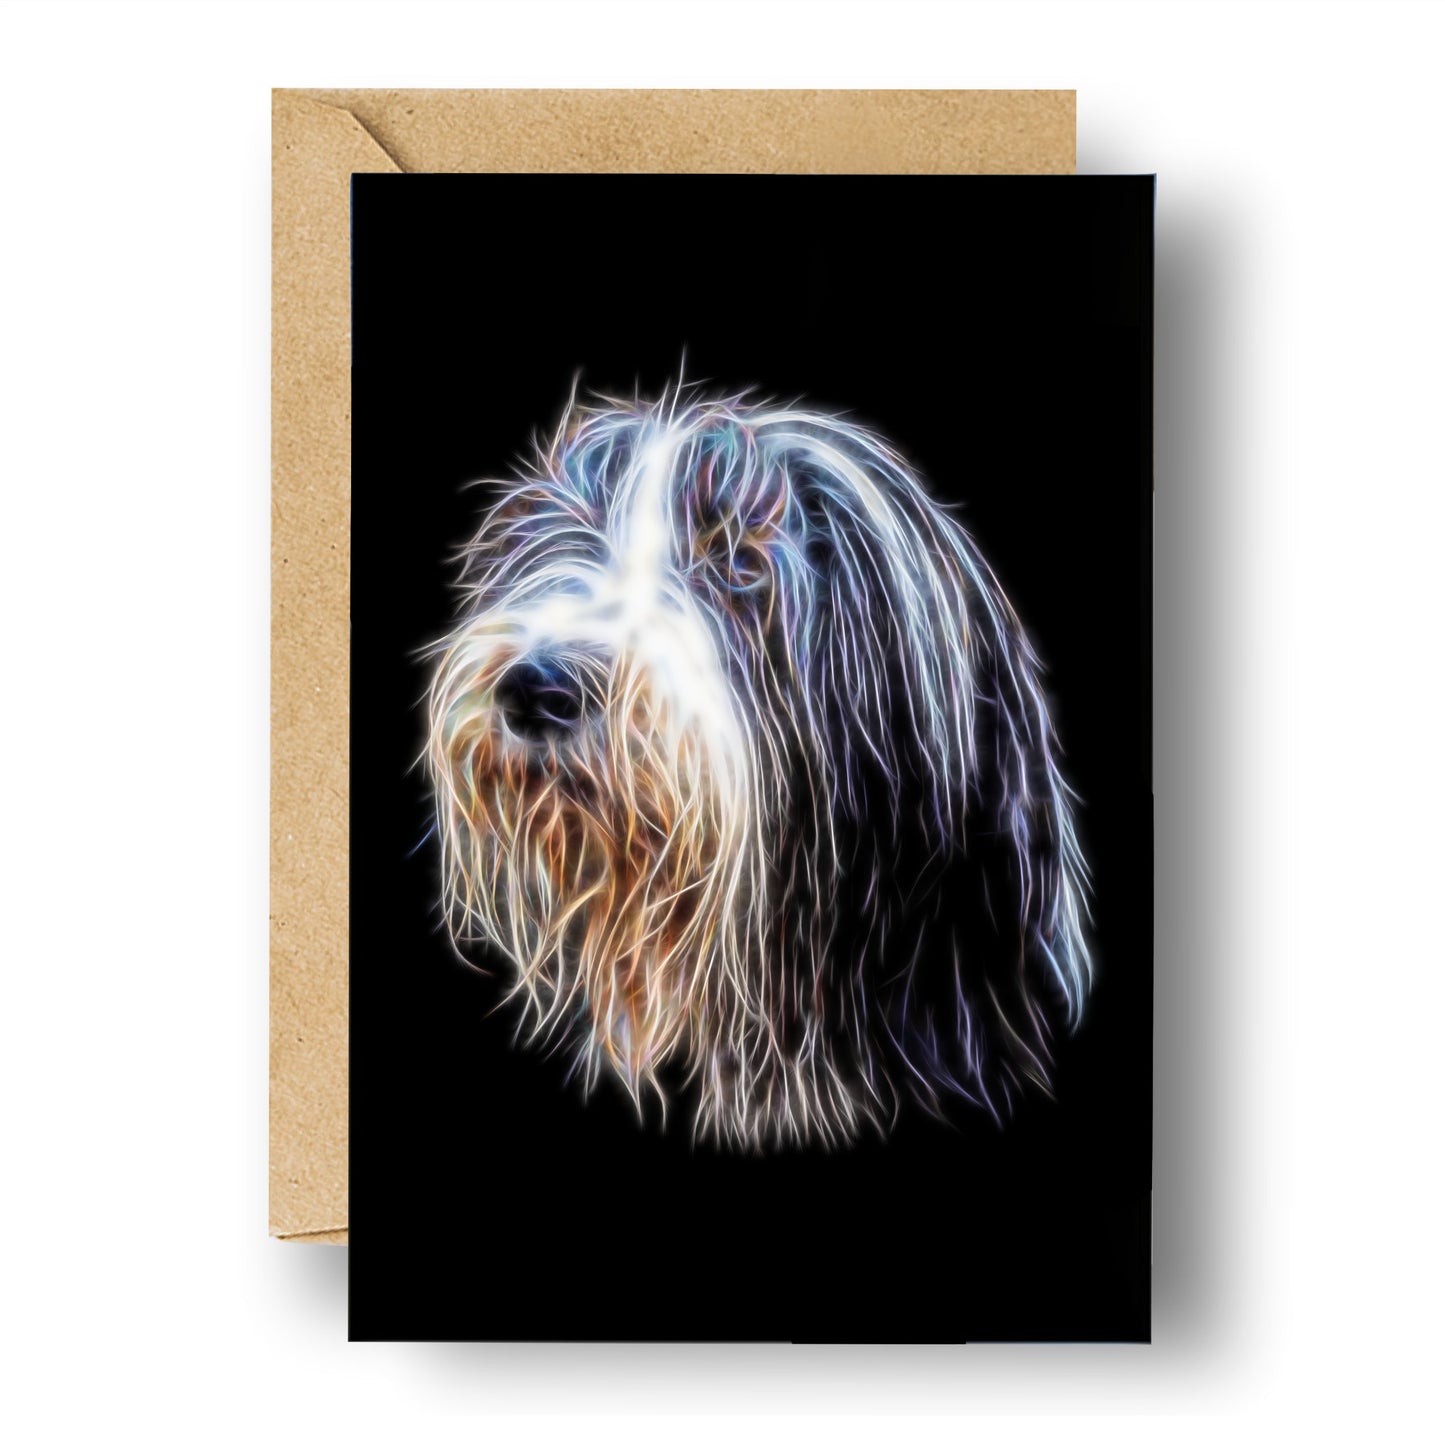 Bearded Collie Greeting Card Blank Inside for Birthdays or any other Occasion